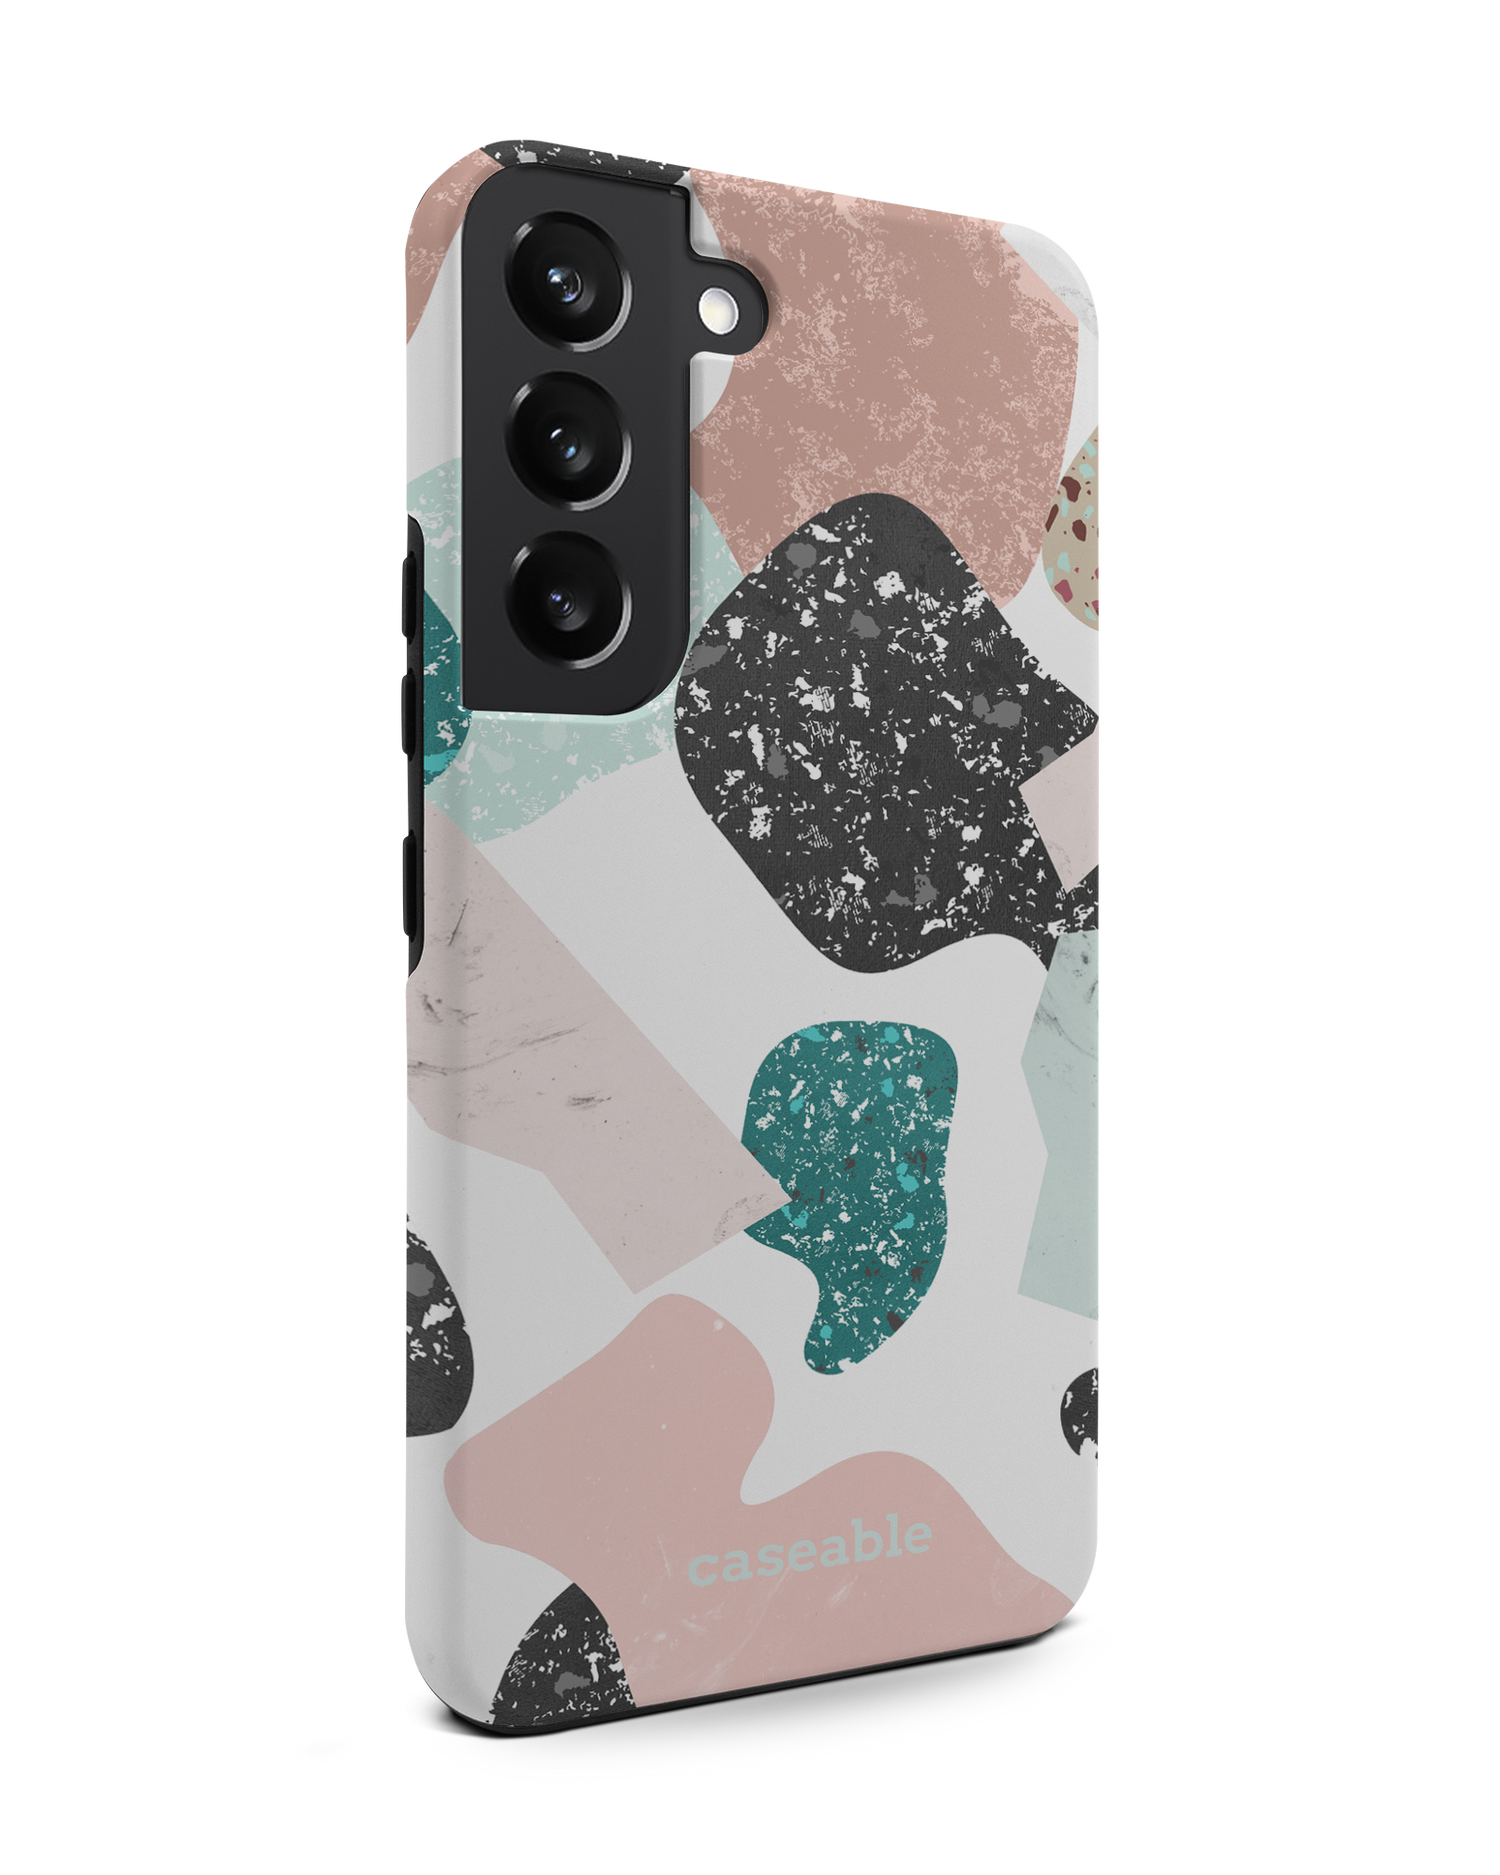 Scattered Shapes Premium Phone Case Samsung Galaxy S22 5G: View from the left side